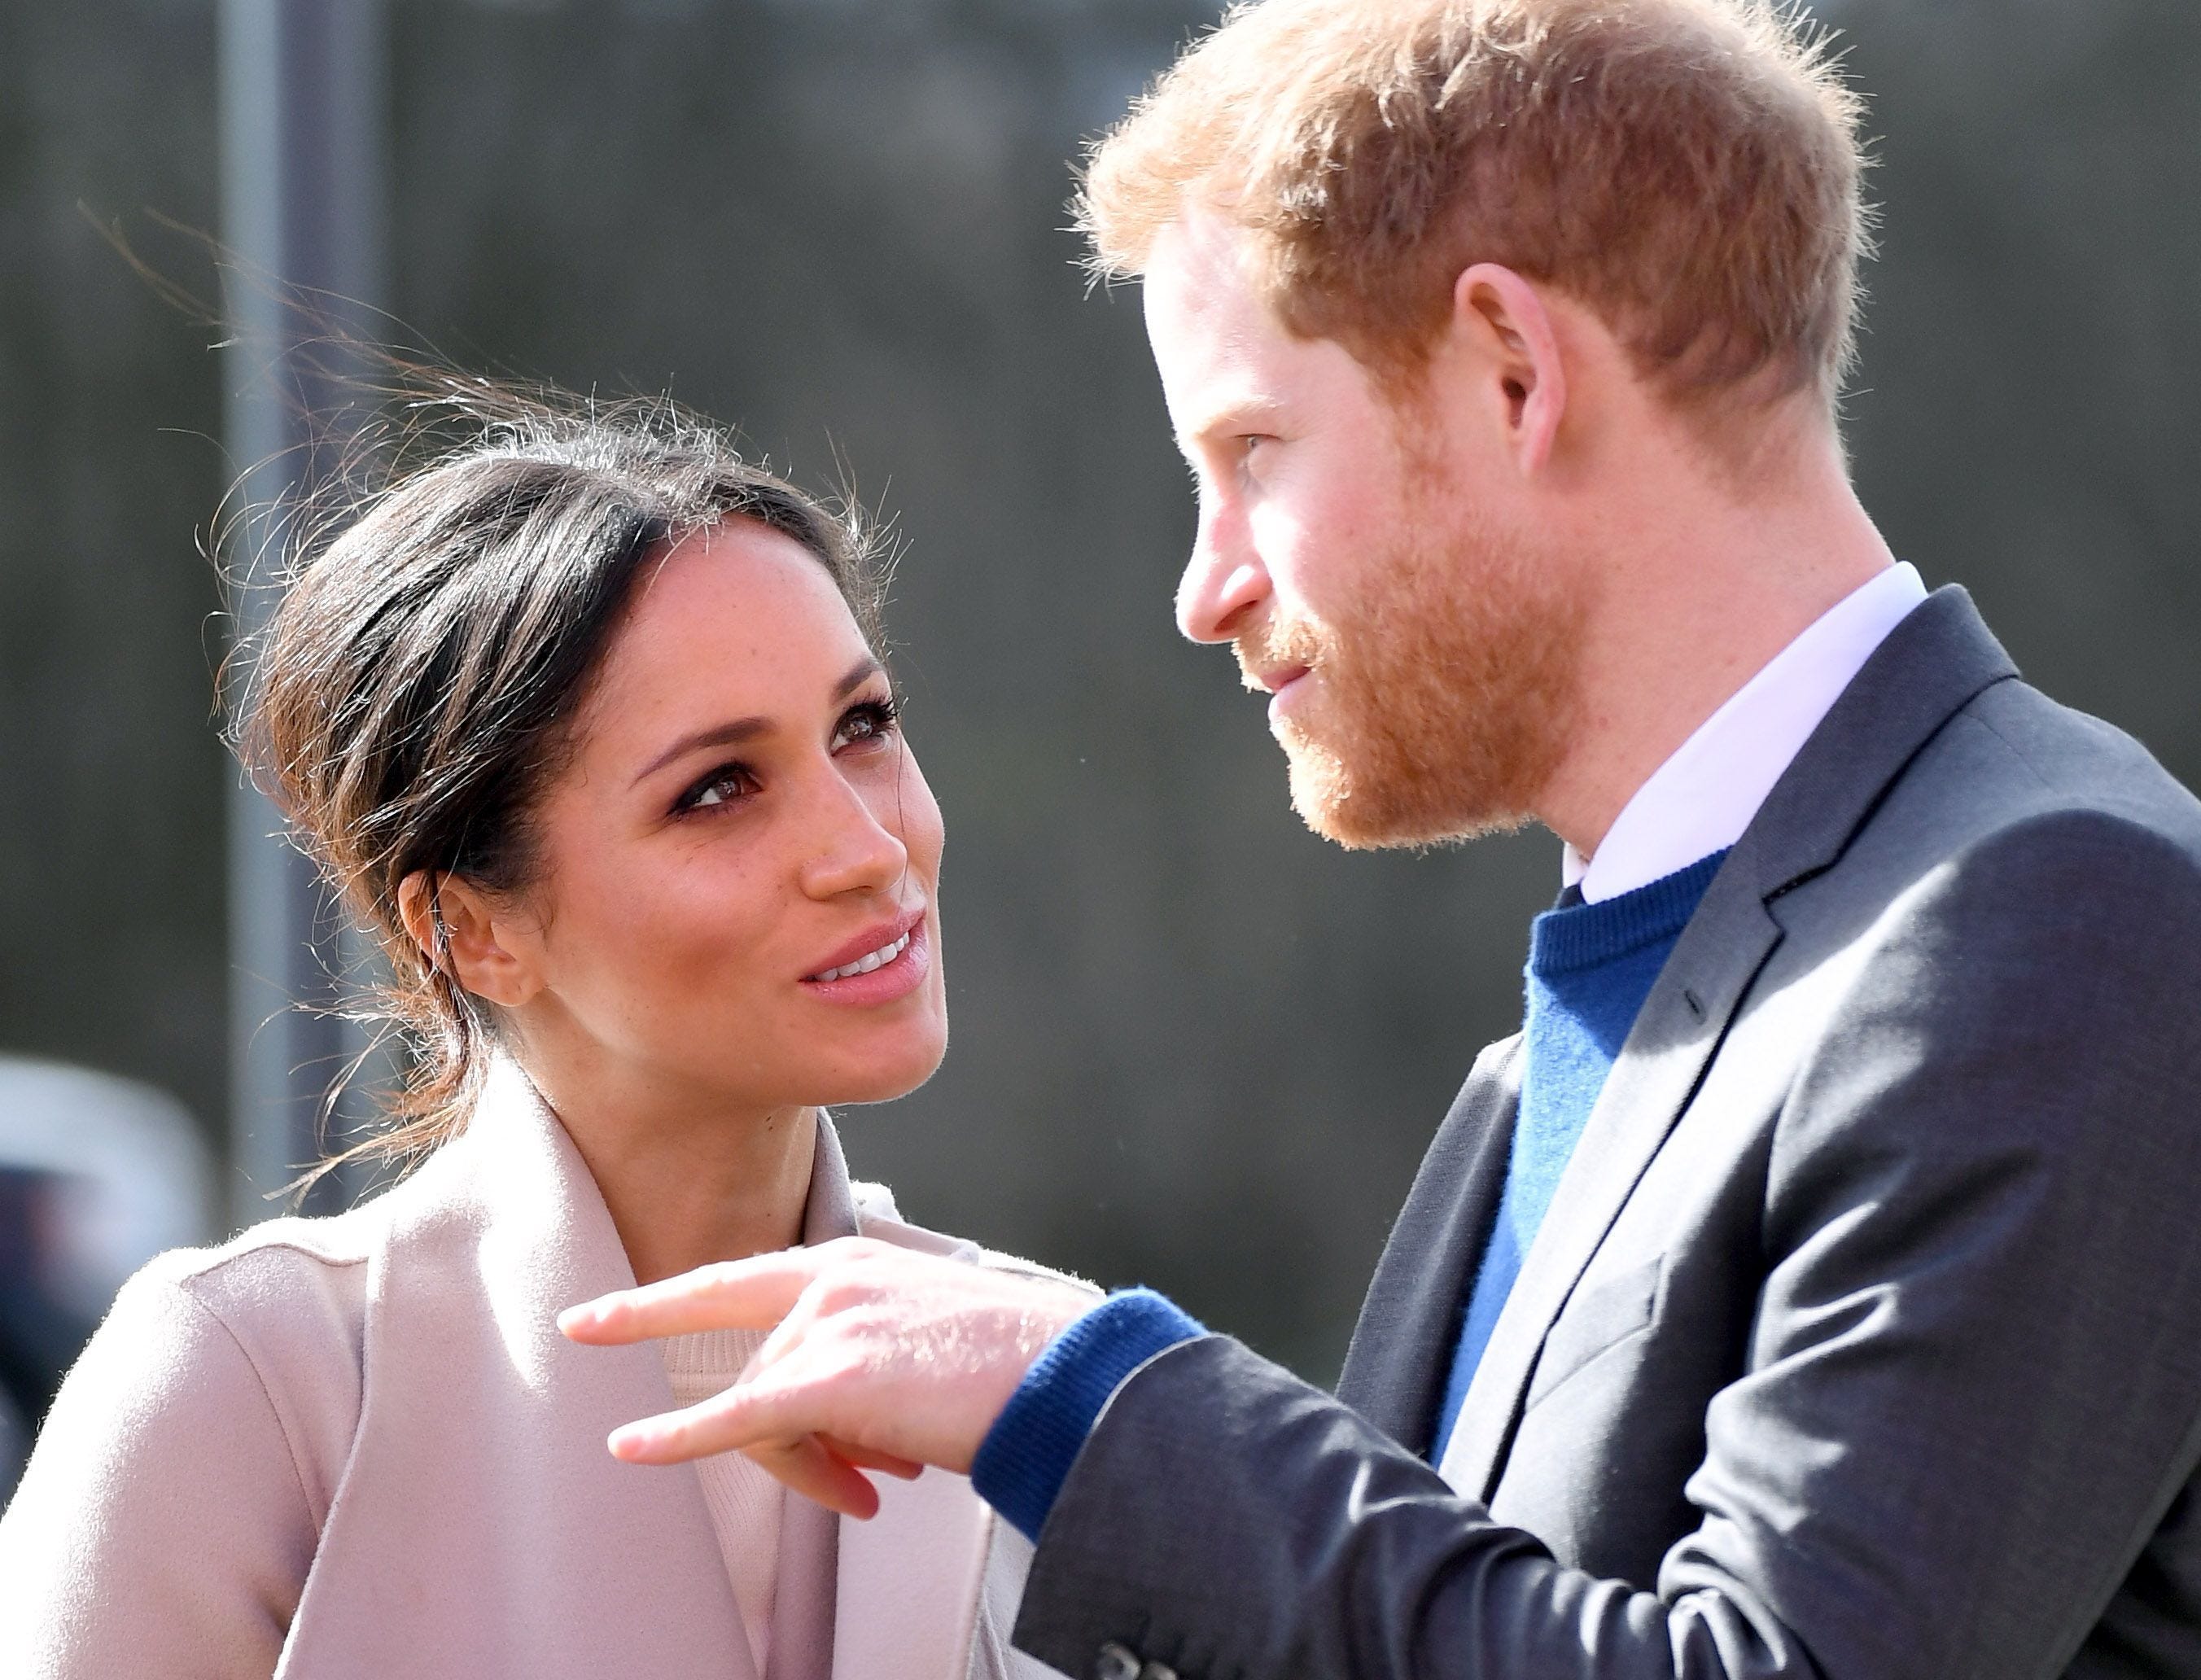 Prince Harry and Meghan Markle's royal wedding: What we know and what we don't know